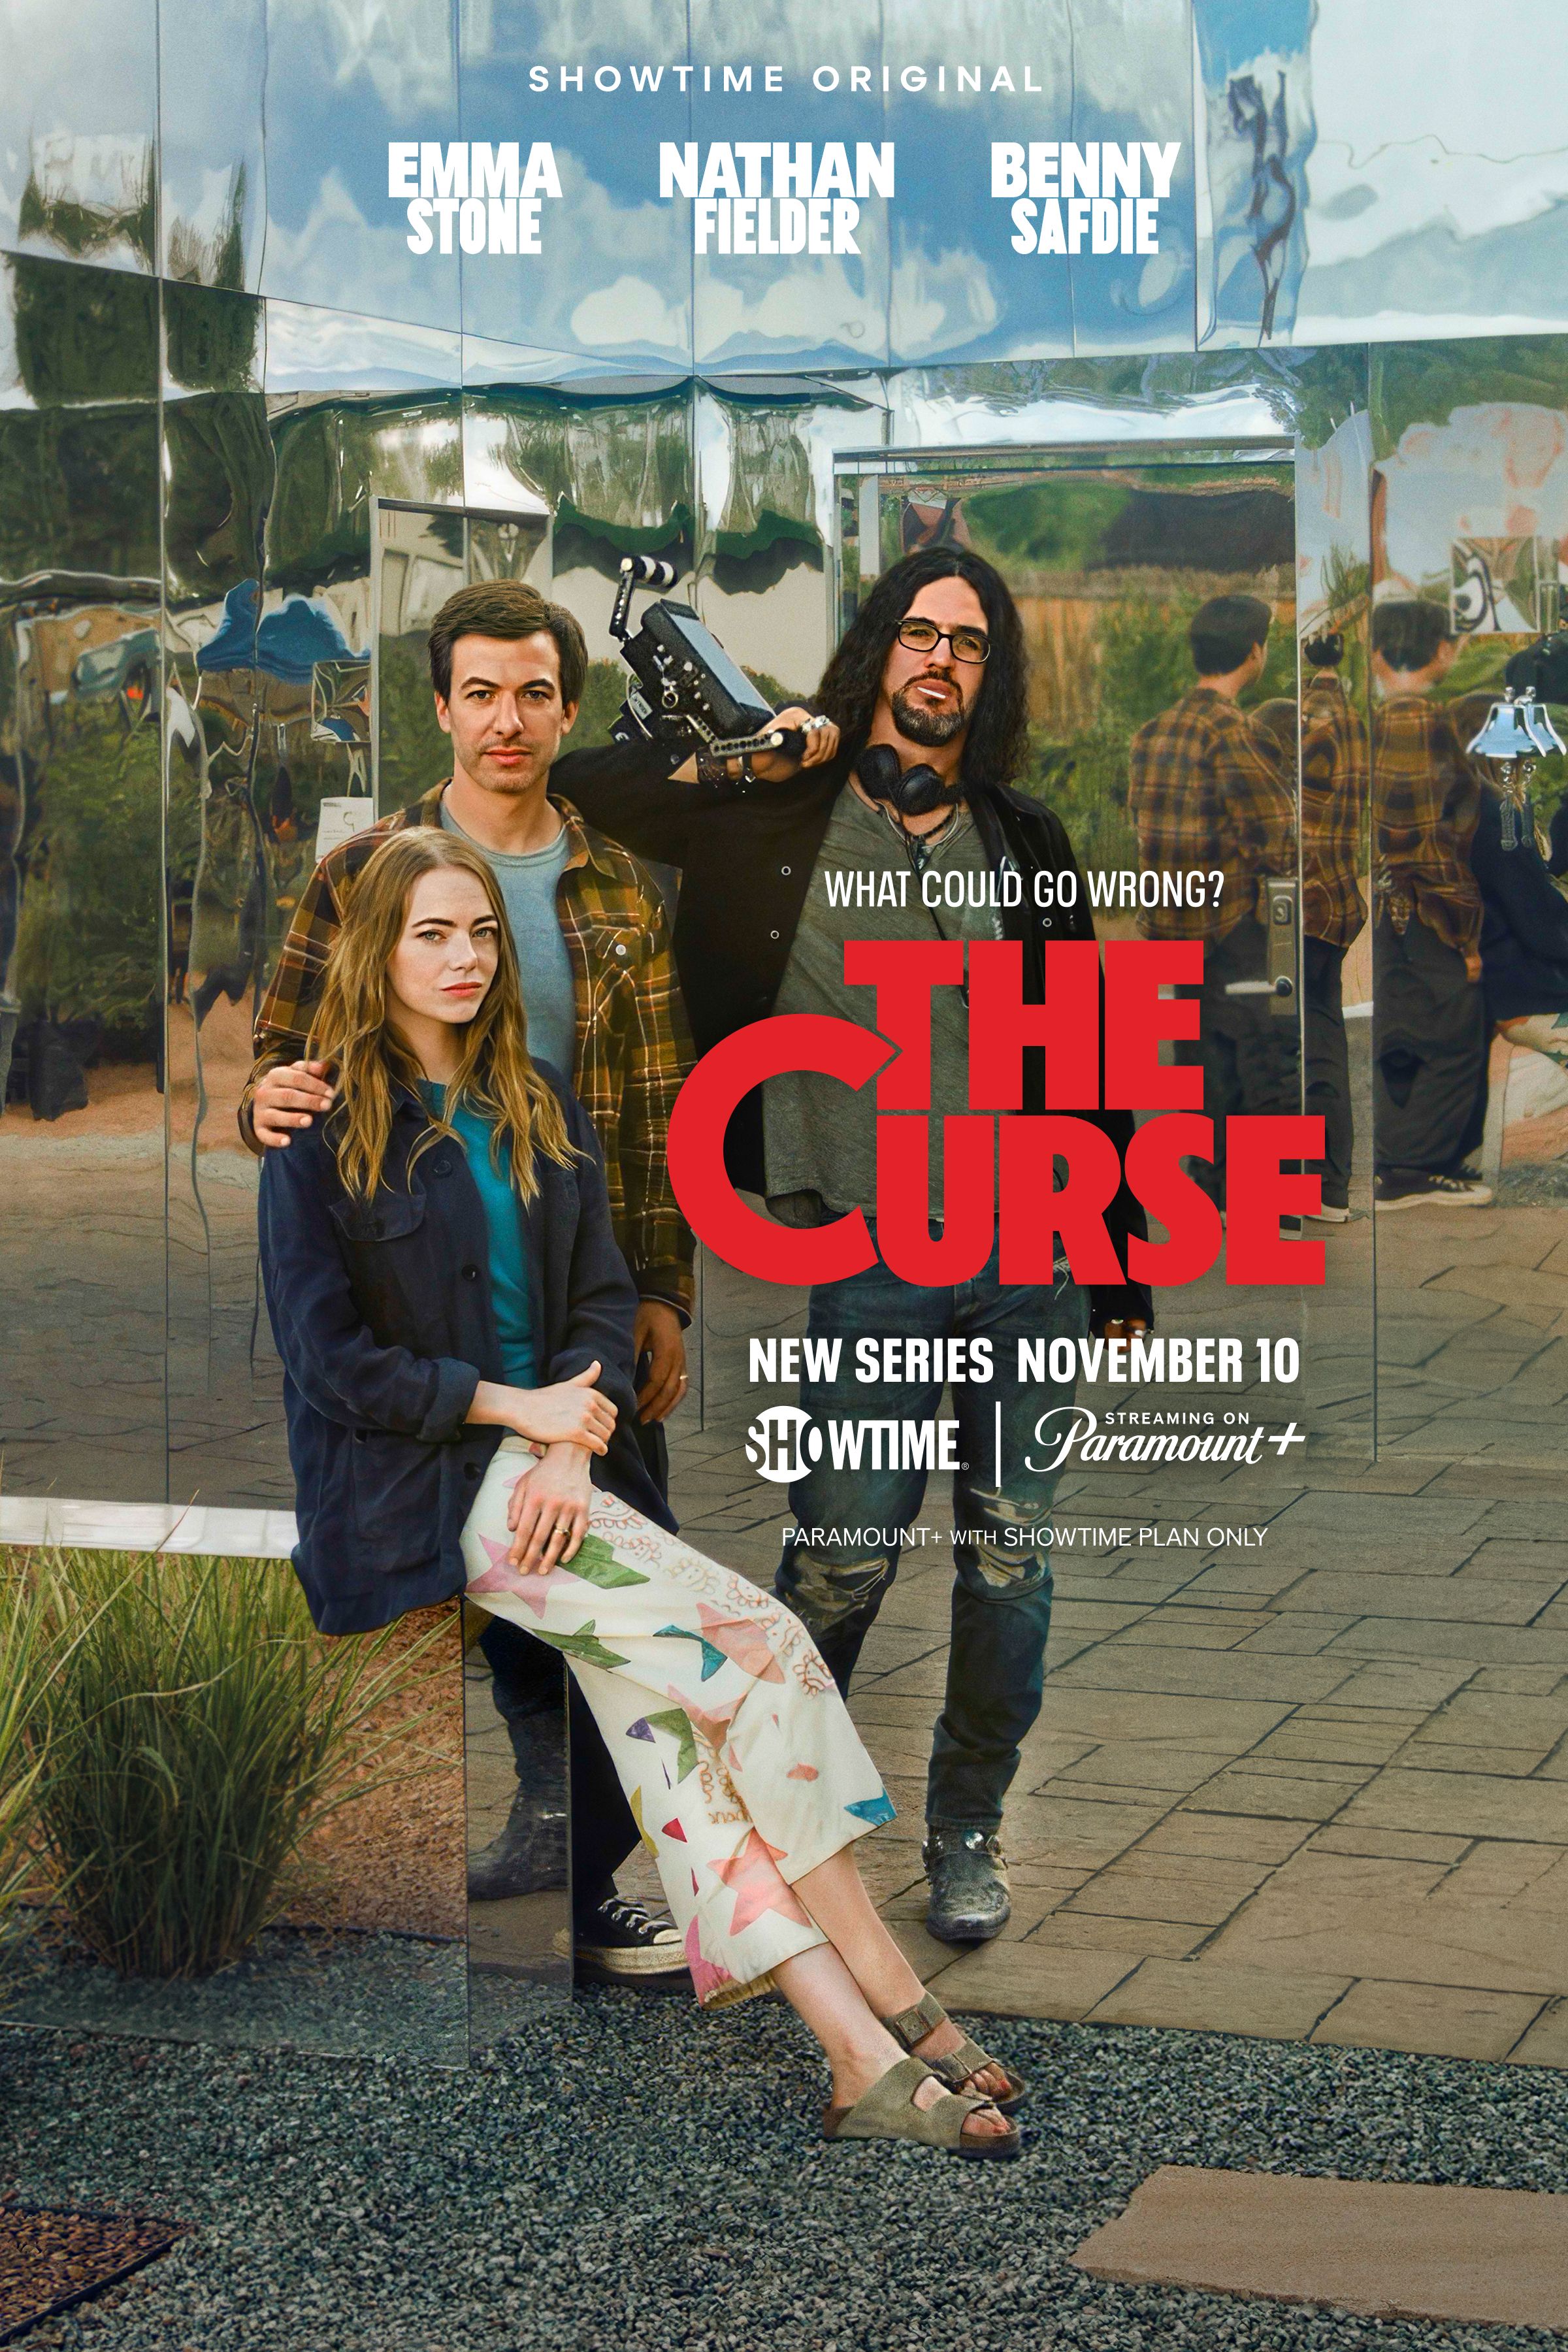 The Curse review: Nathan Fielder's new show is bizarre and brilliant - Vox